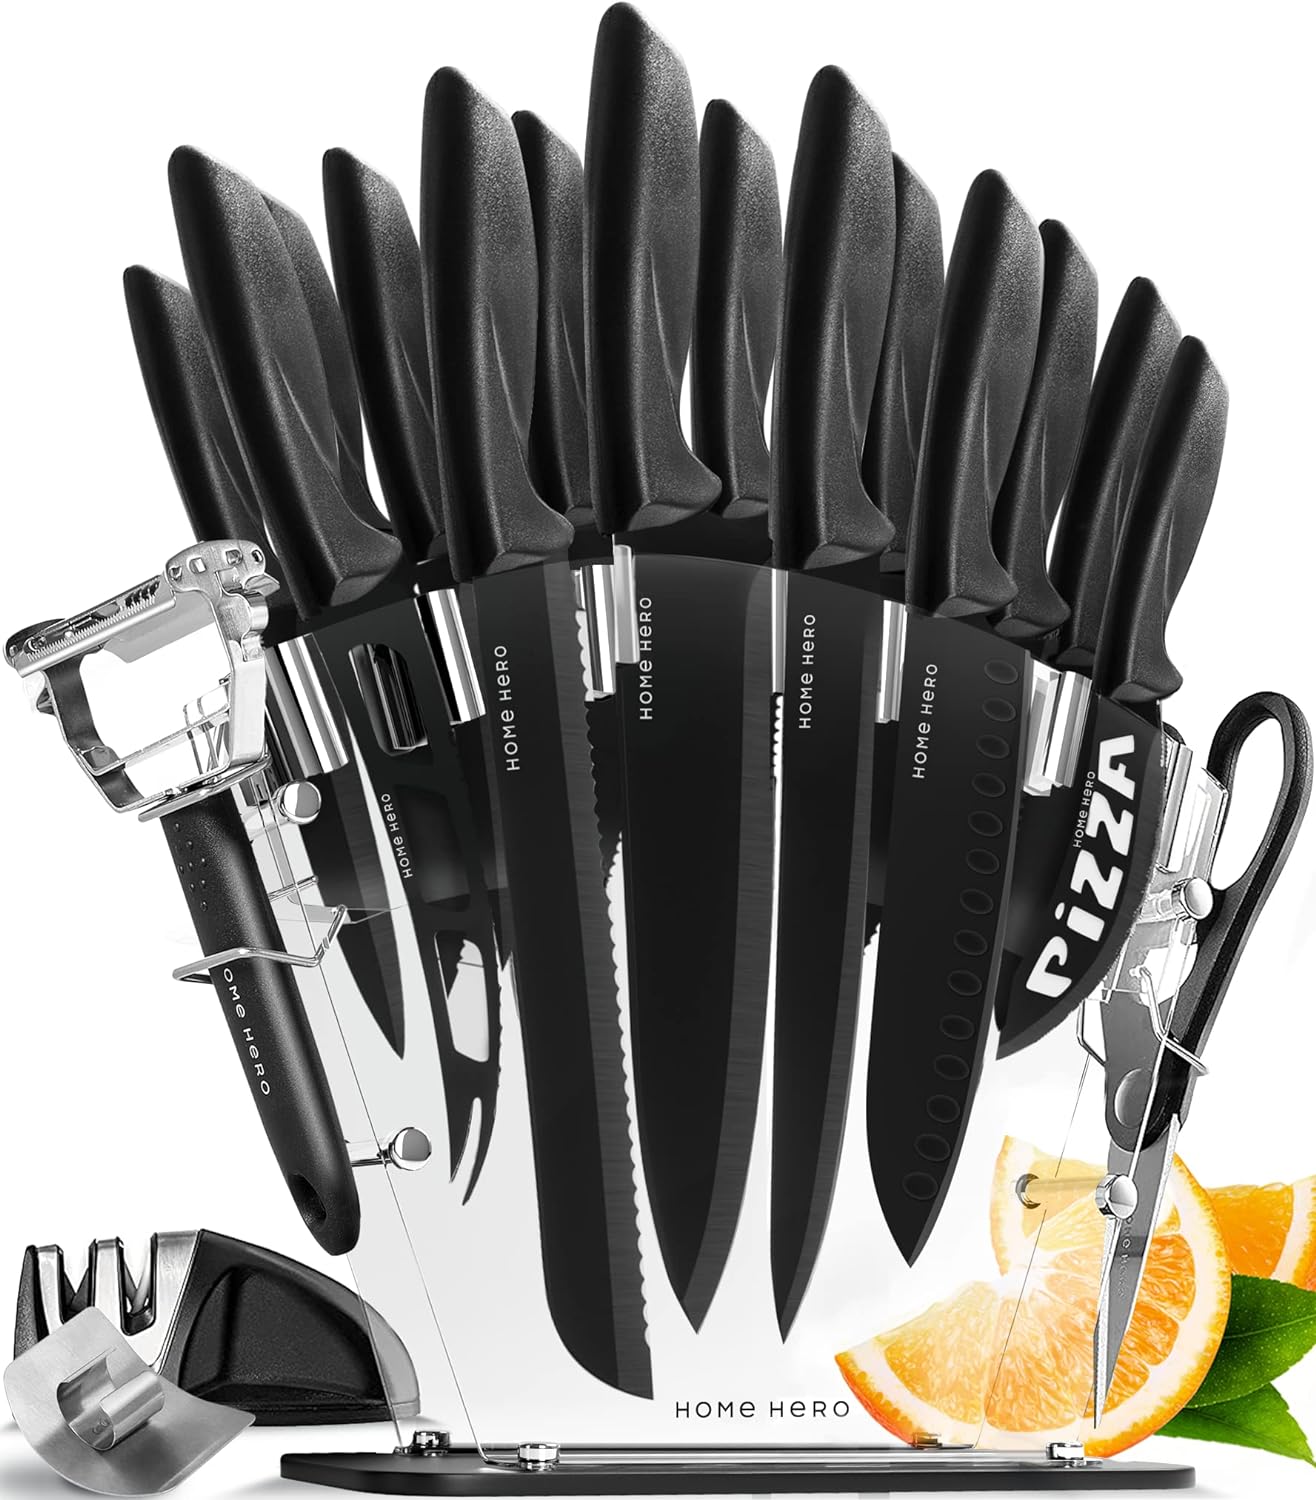  Home Hero 17 Pieces Kitchen Knives 